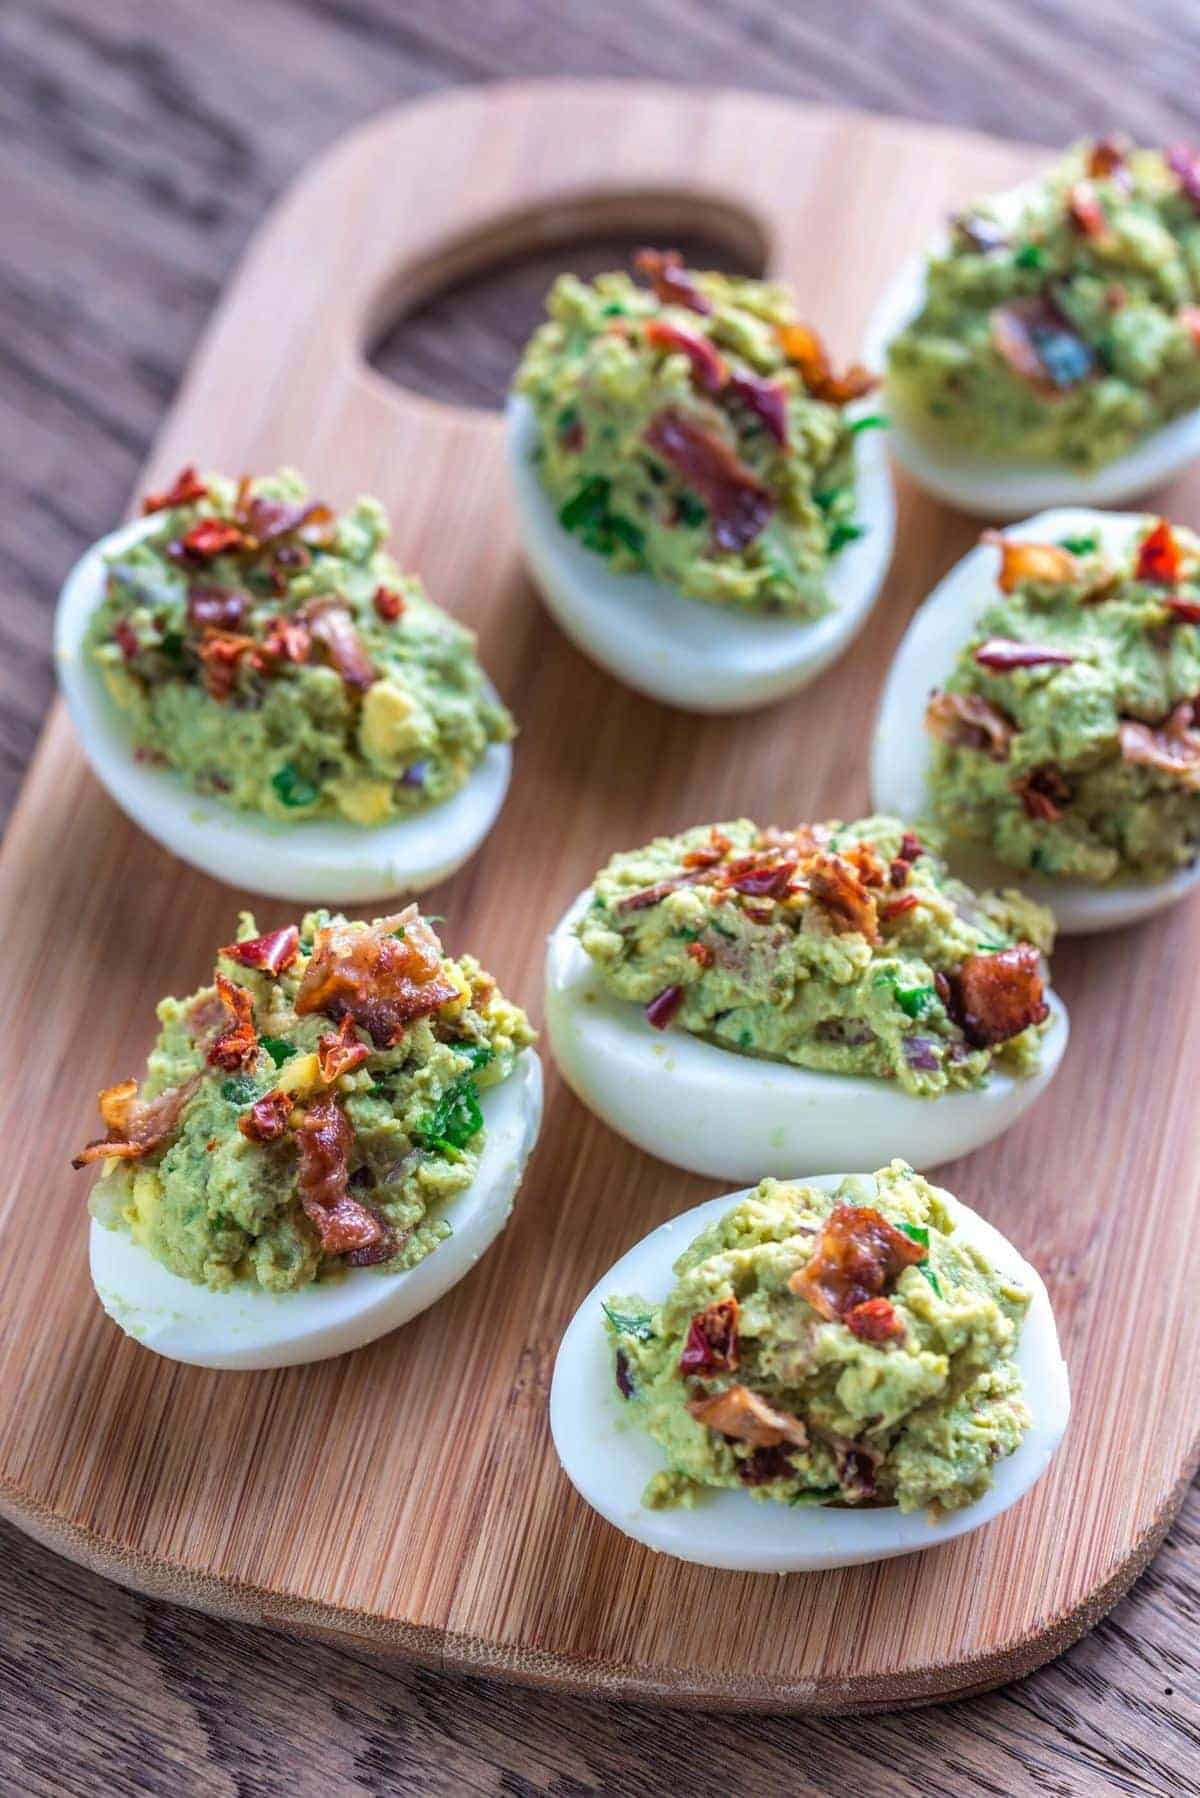 Deviled eggs on cutting board stuffed with bacon and guacamole.